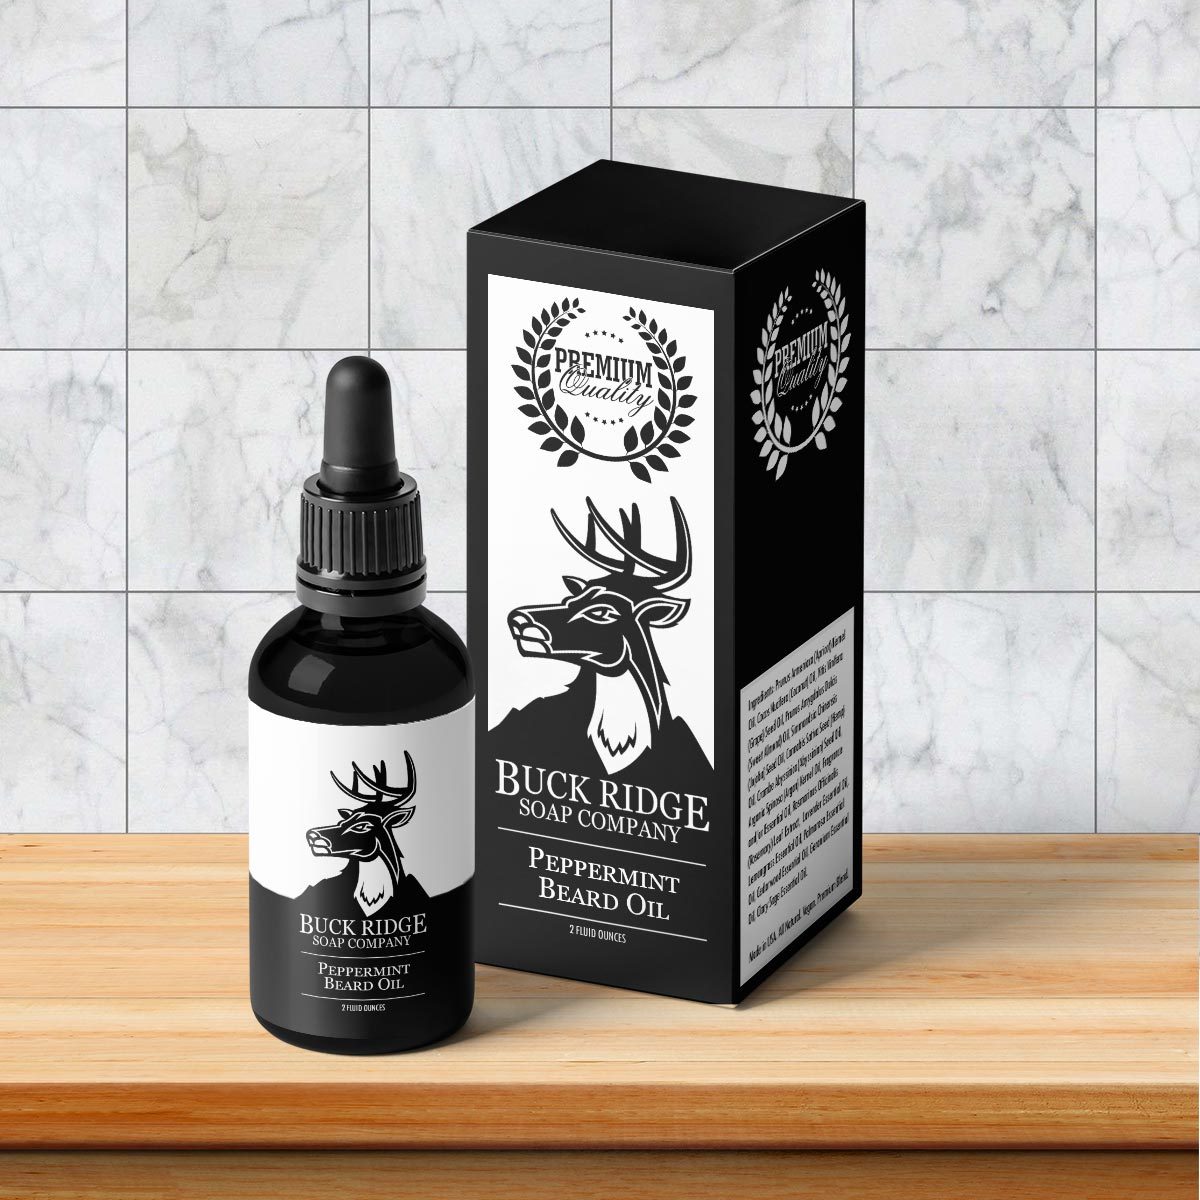 Peppermint Beard Oil - Made in the USA